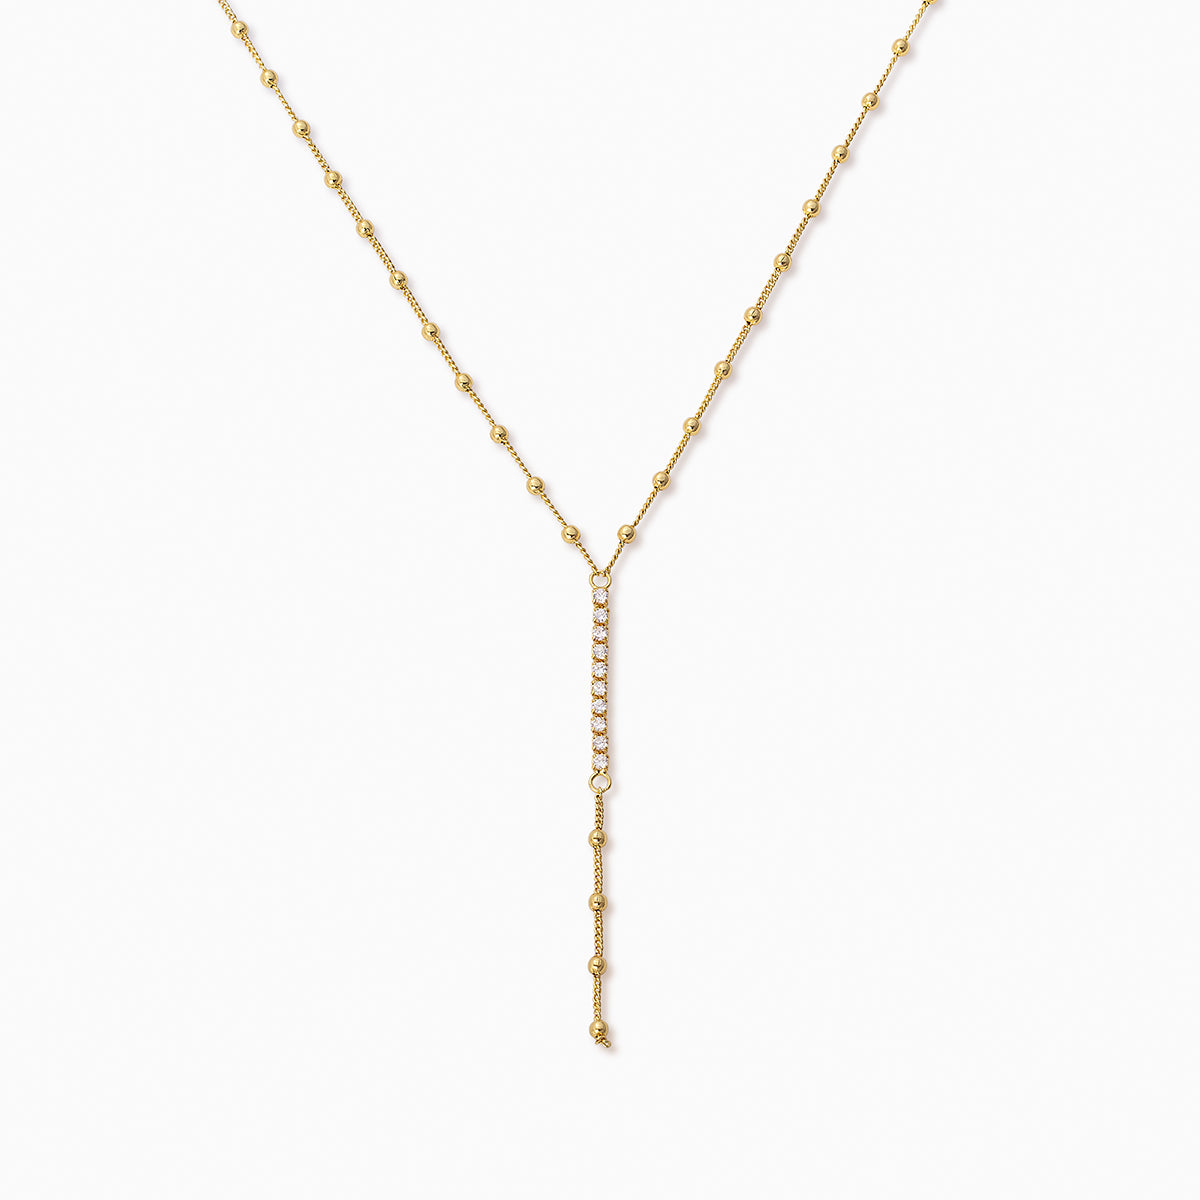 Little Lady Lariat Necklace | Gold | Product Image | Uncommon James